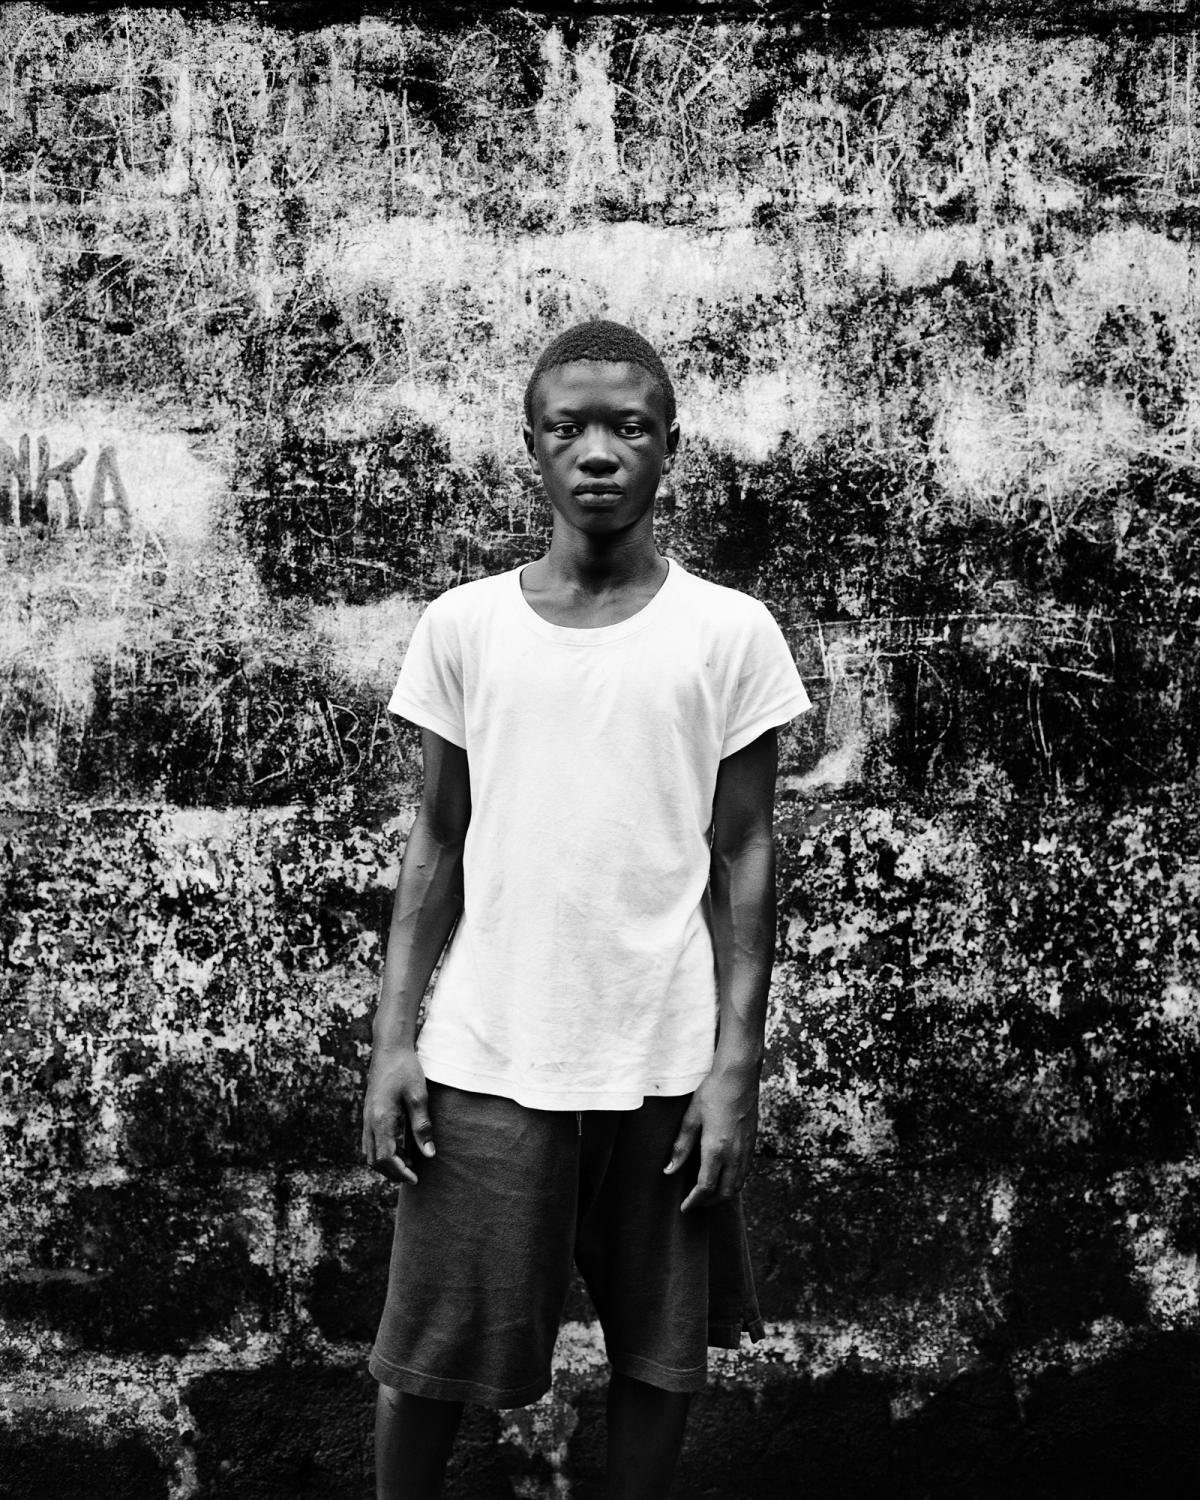 City of rest - SIERRA LEONE Freetown. August 2007. Portarit of an inmate...